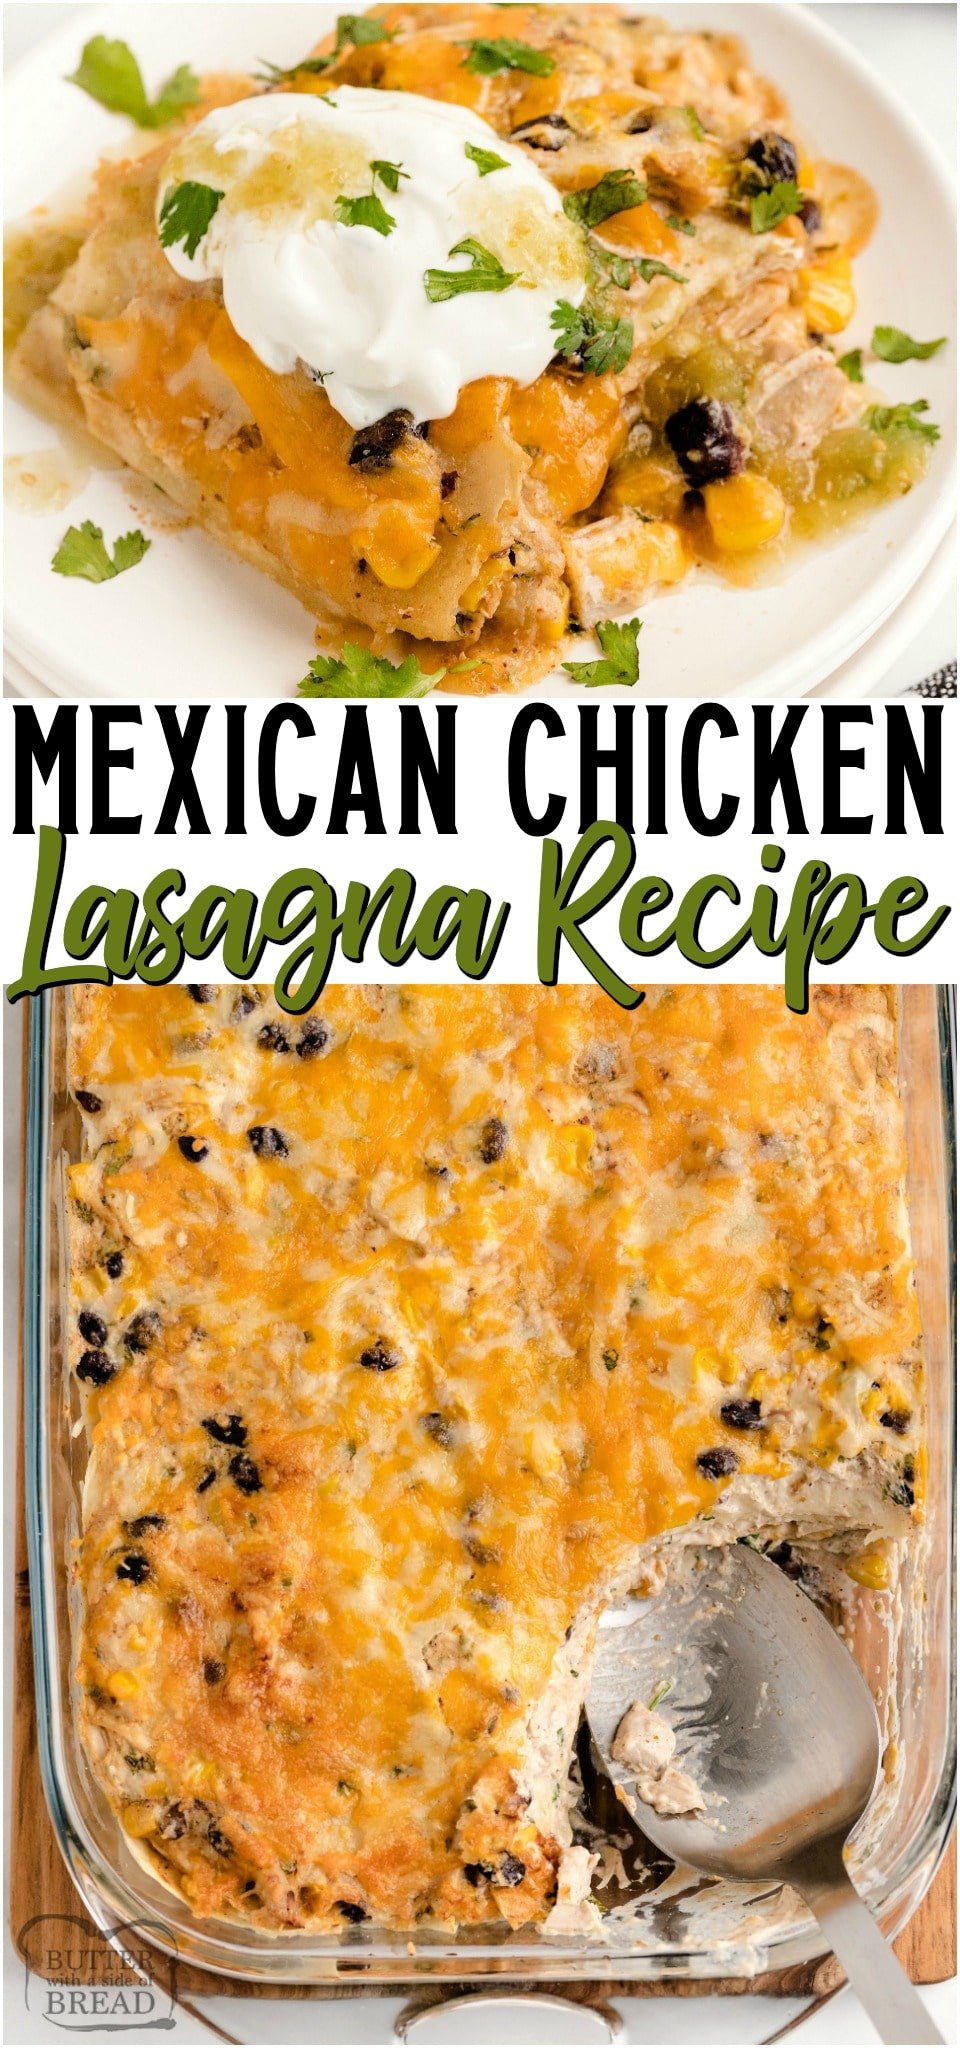 Mexican Chicken Lasagna is an easy chicken dinner recipe made by layering tortilla strips with sour cream, black beans, salsa, corn, seasonings and cheese of course! Easy chicken lasagna recipe with fabulous Mexican flavors our family loves. #chicken #dinner #easydinner #mexican #lasagna #casserole #recipe from BUTTER WITH A SIDE OF BREAD